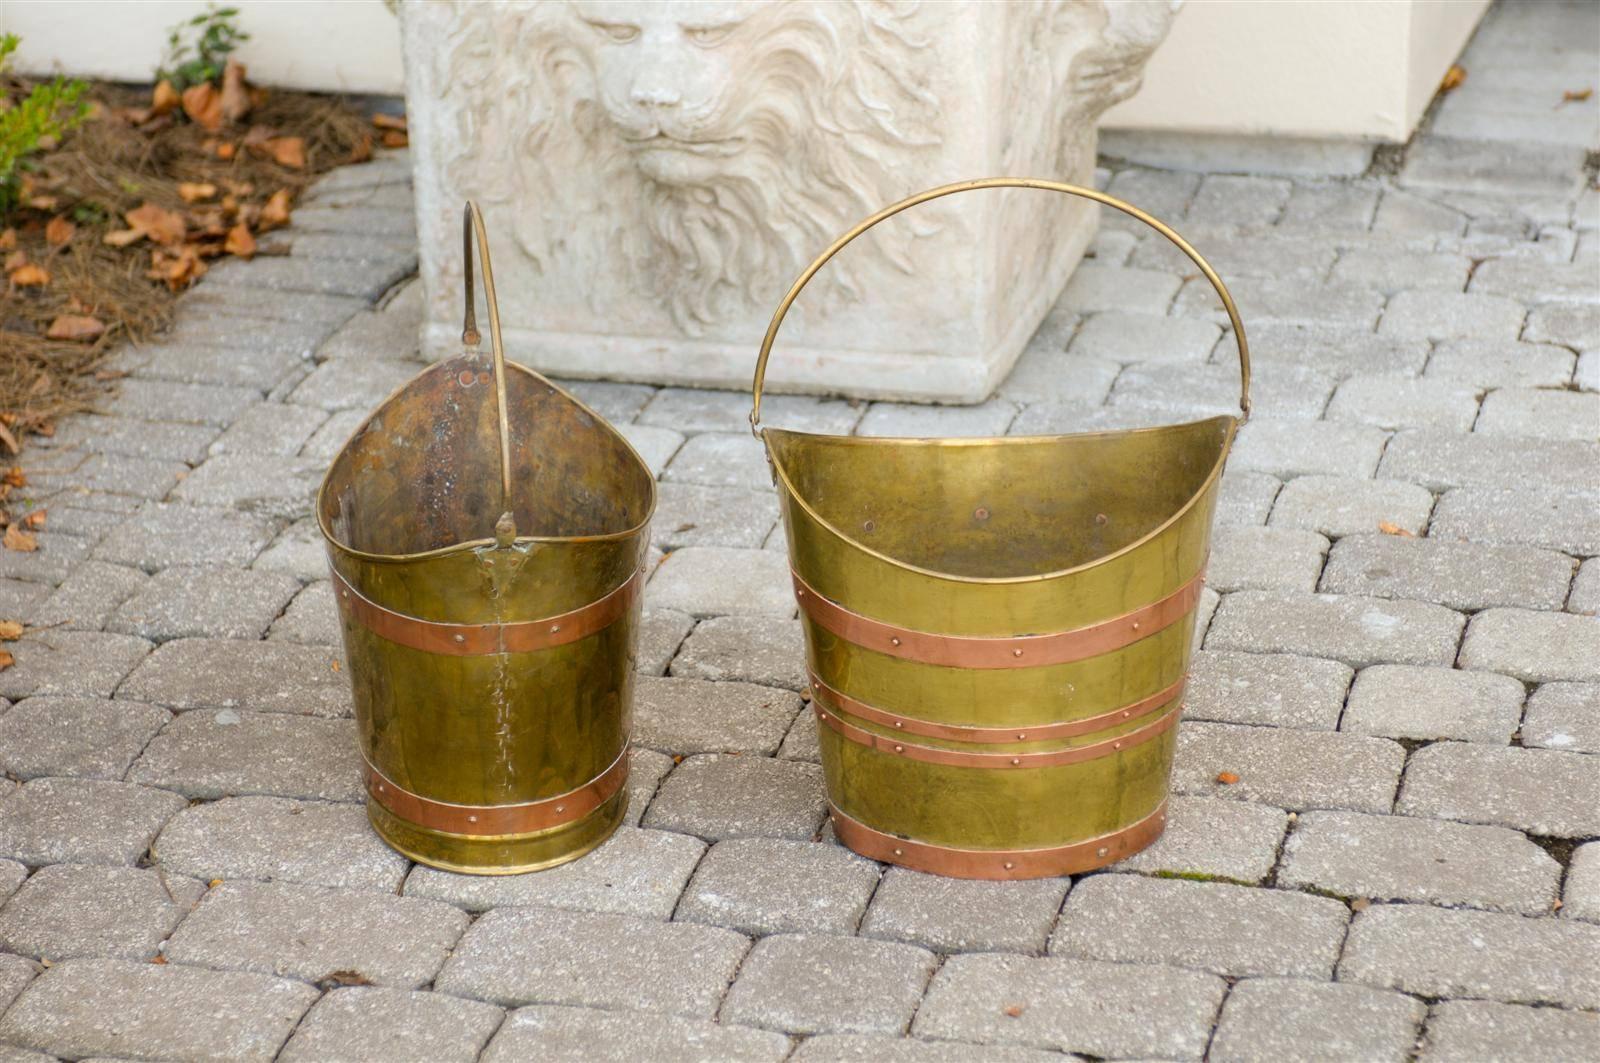 An English oval brass bucket with handle from the early 20th century.  The rim of the brass bucket is curved on two sides with the high point securing the handle. This creates a wide shape allowing for larger items to be placed in the bucket. 